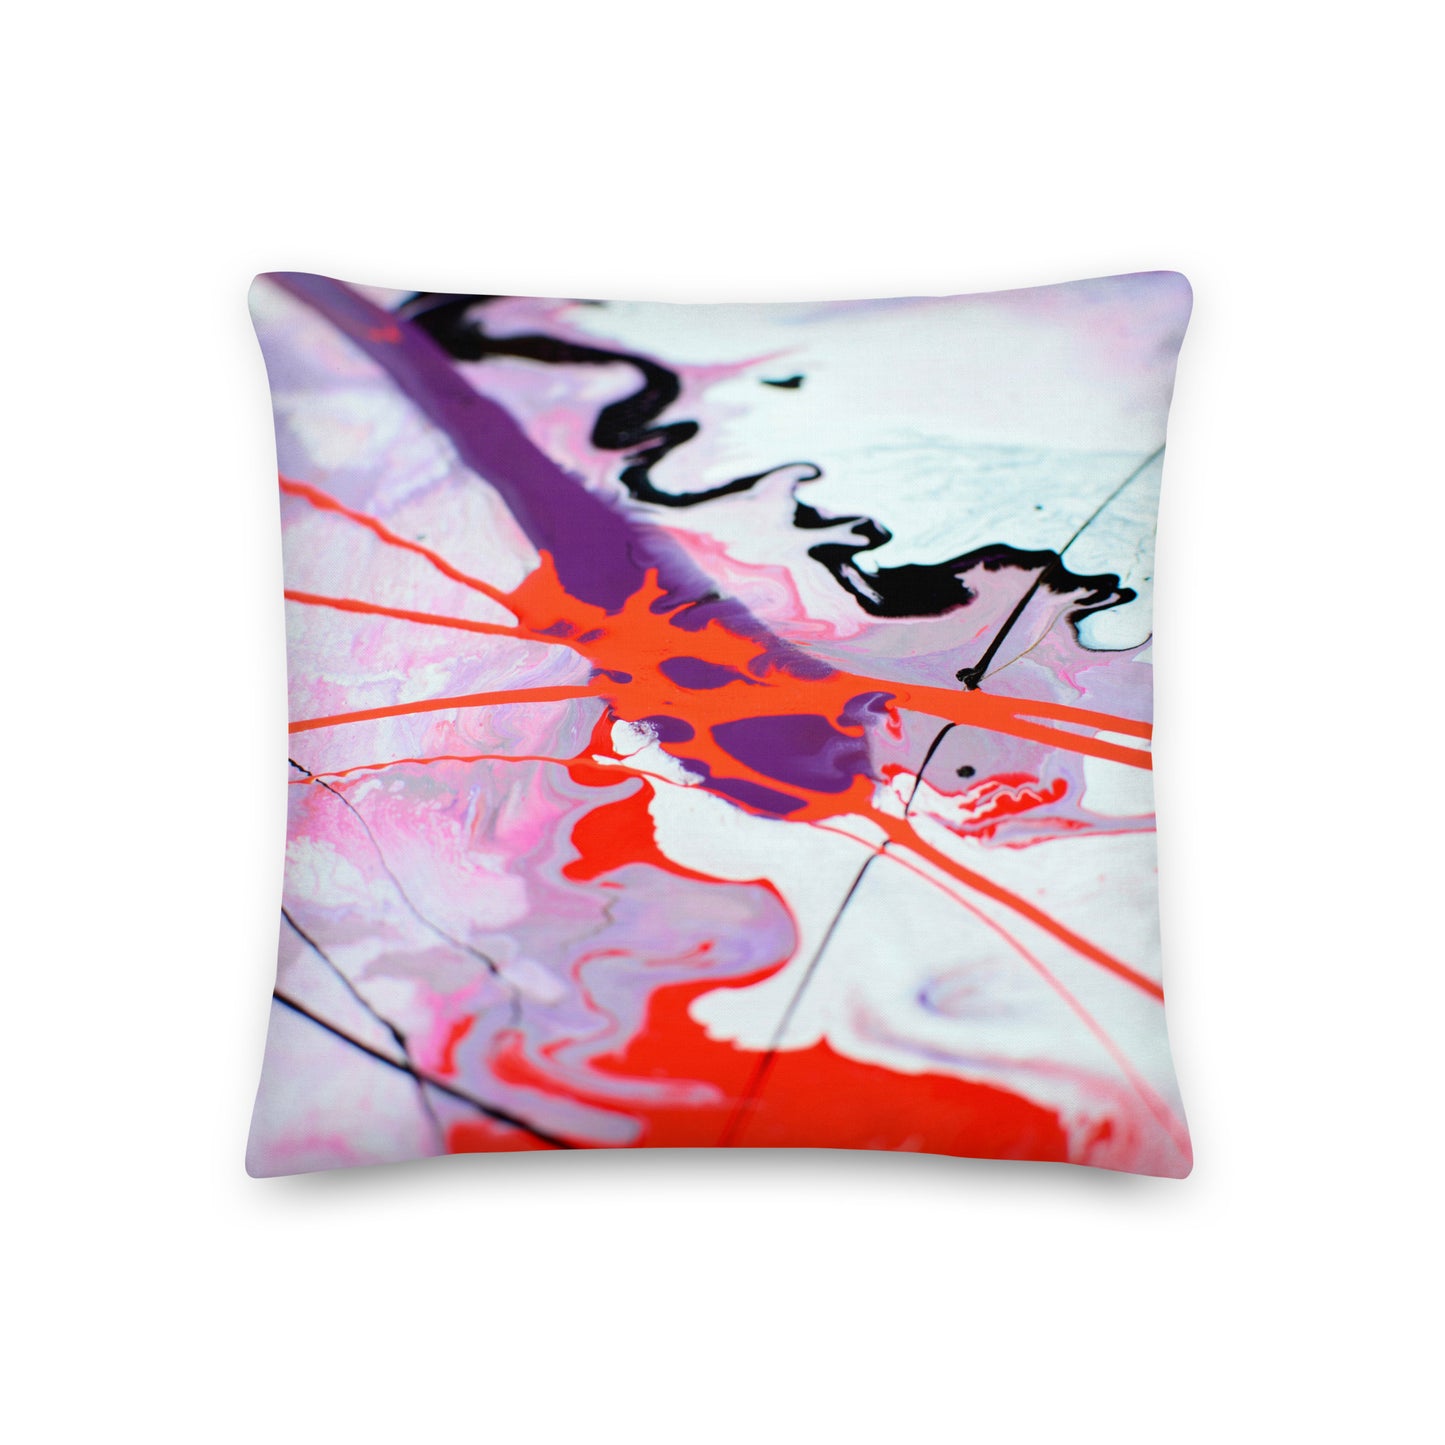 Premium Pillow - Pink and red design